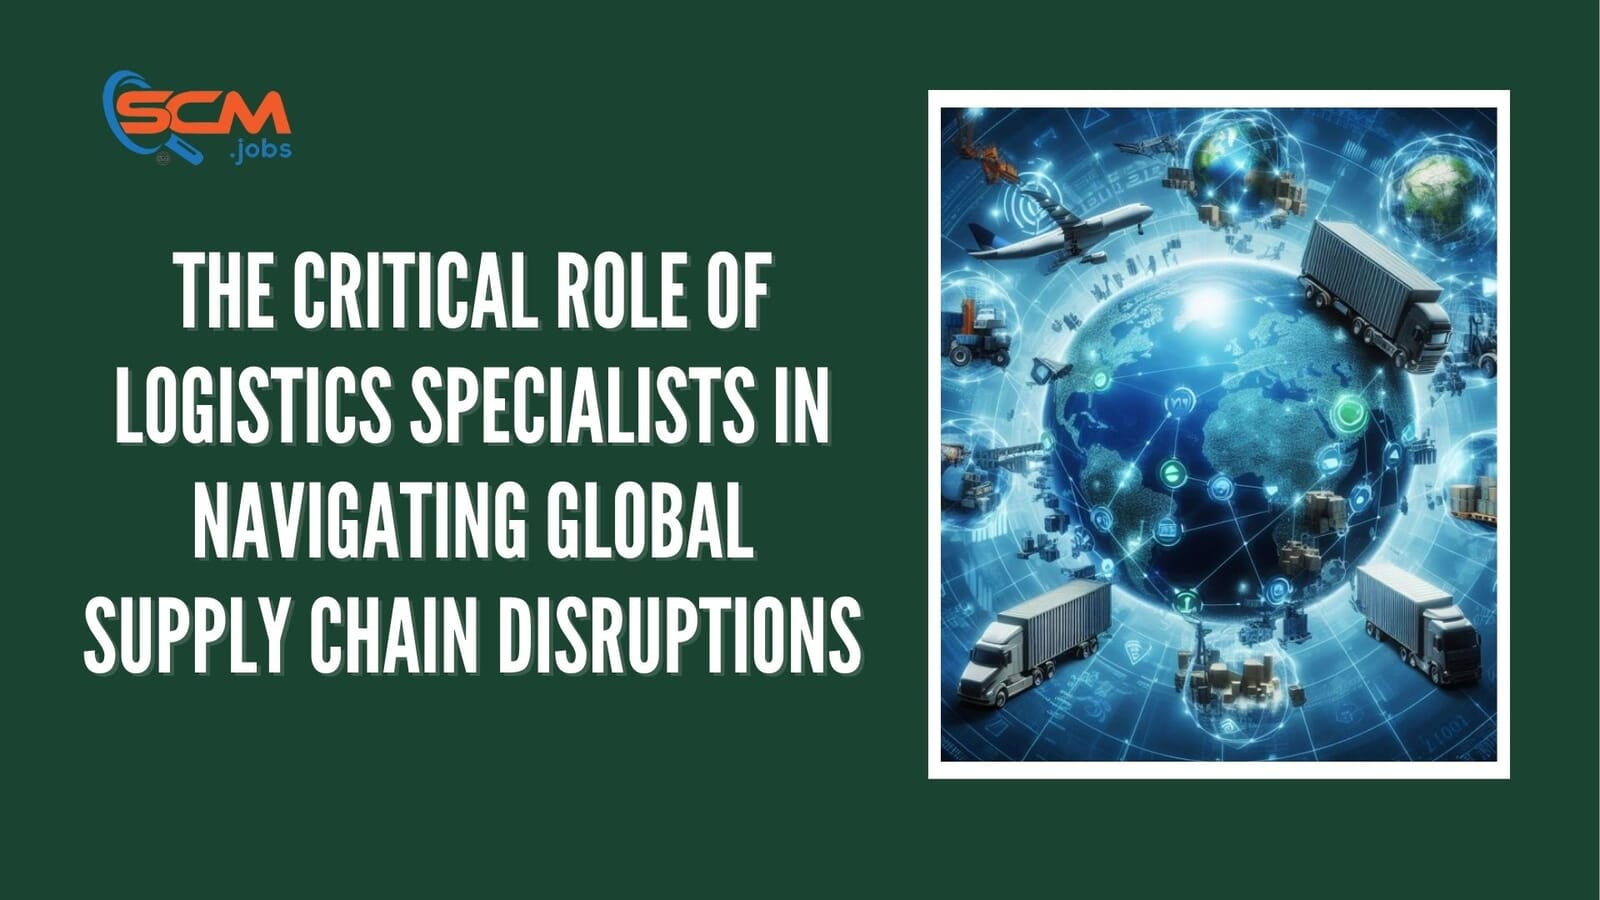 The Critical Role of Logistics Specialists in Navigating Global Supply Chain Disruptions